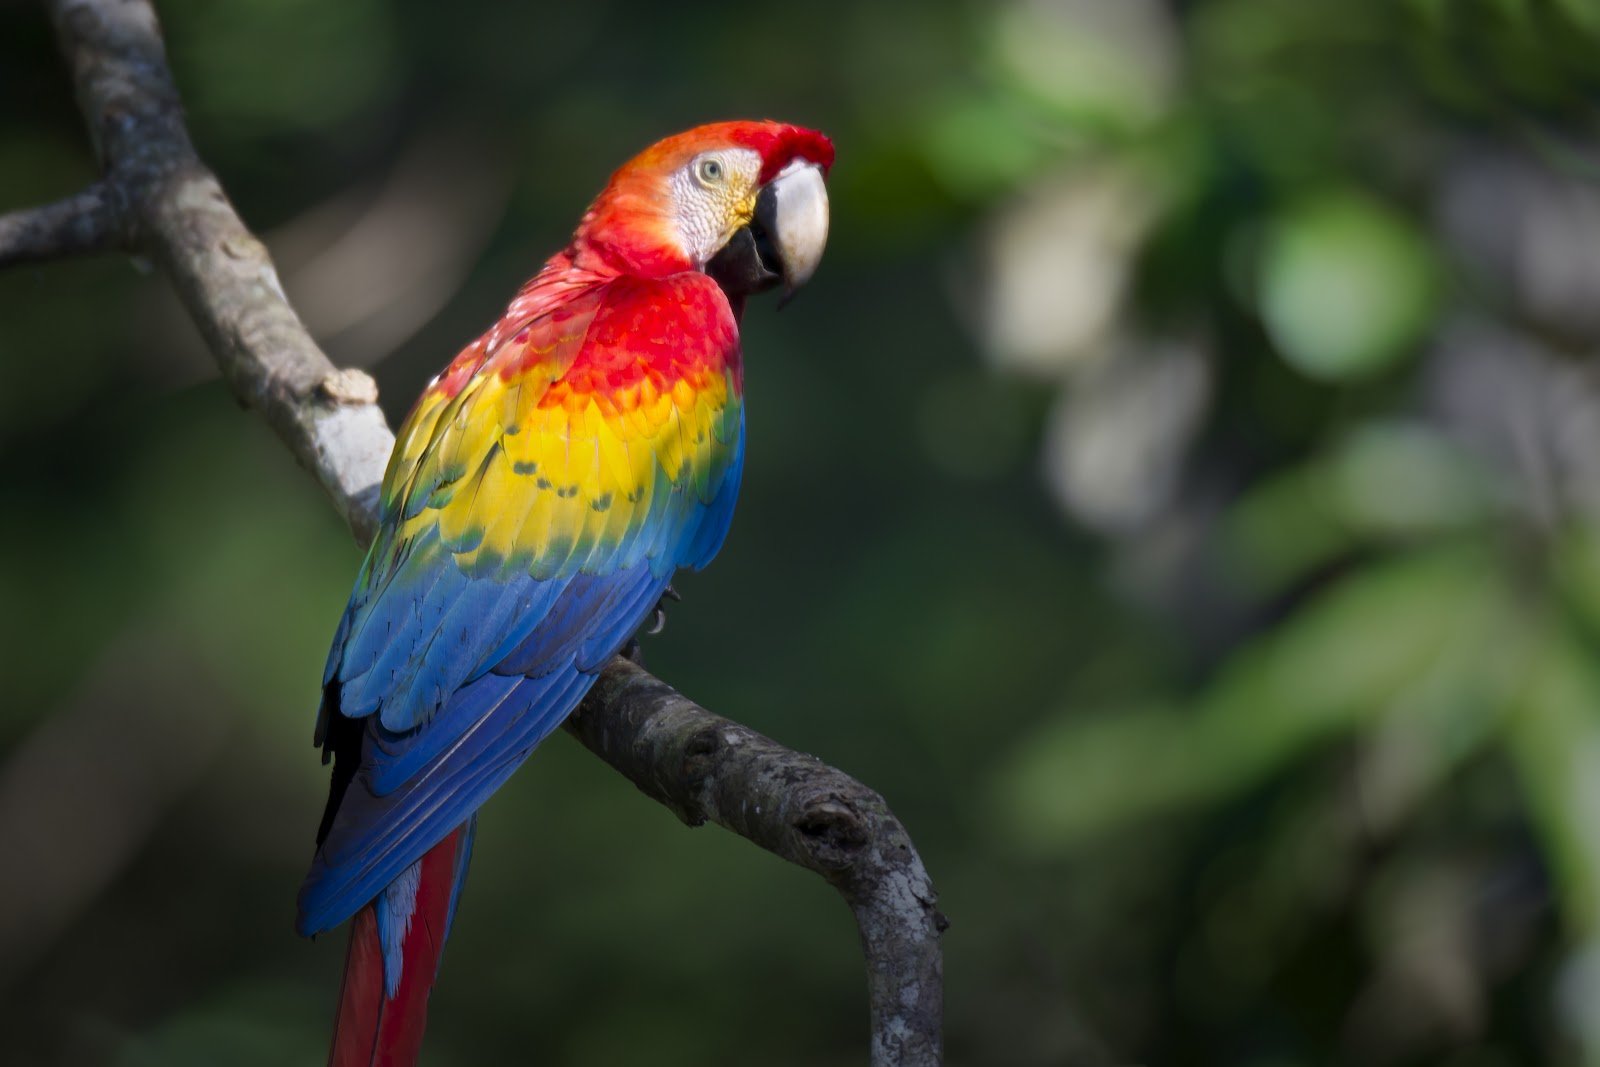 The National Bird of Honduras is the Scarlet Macaw.